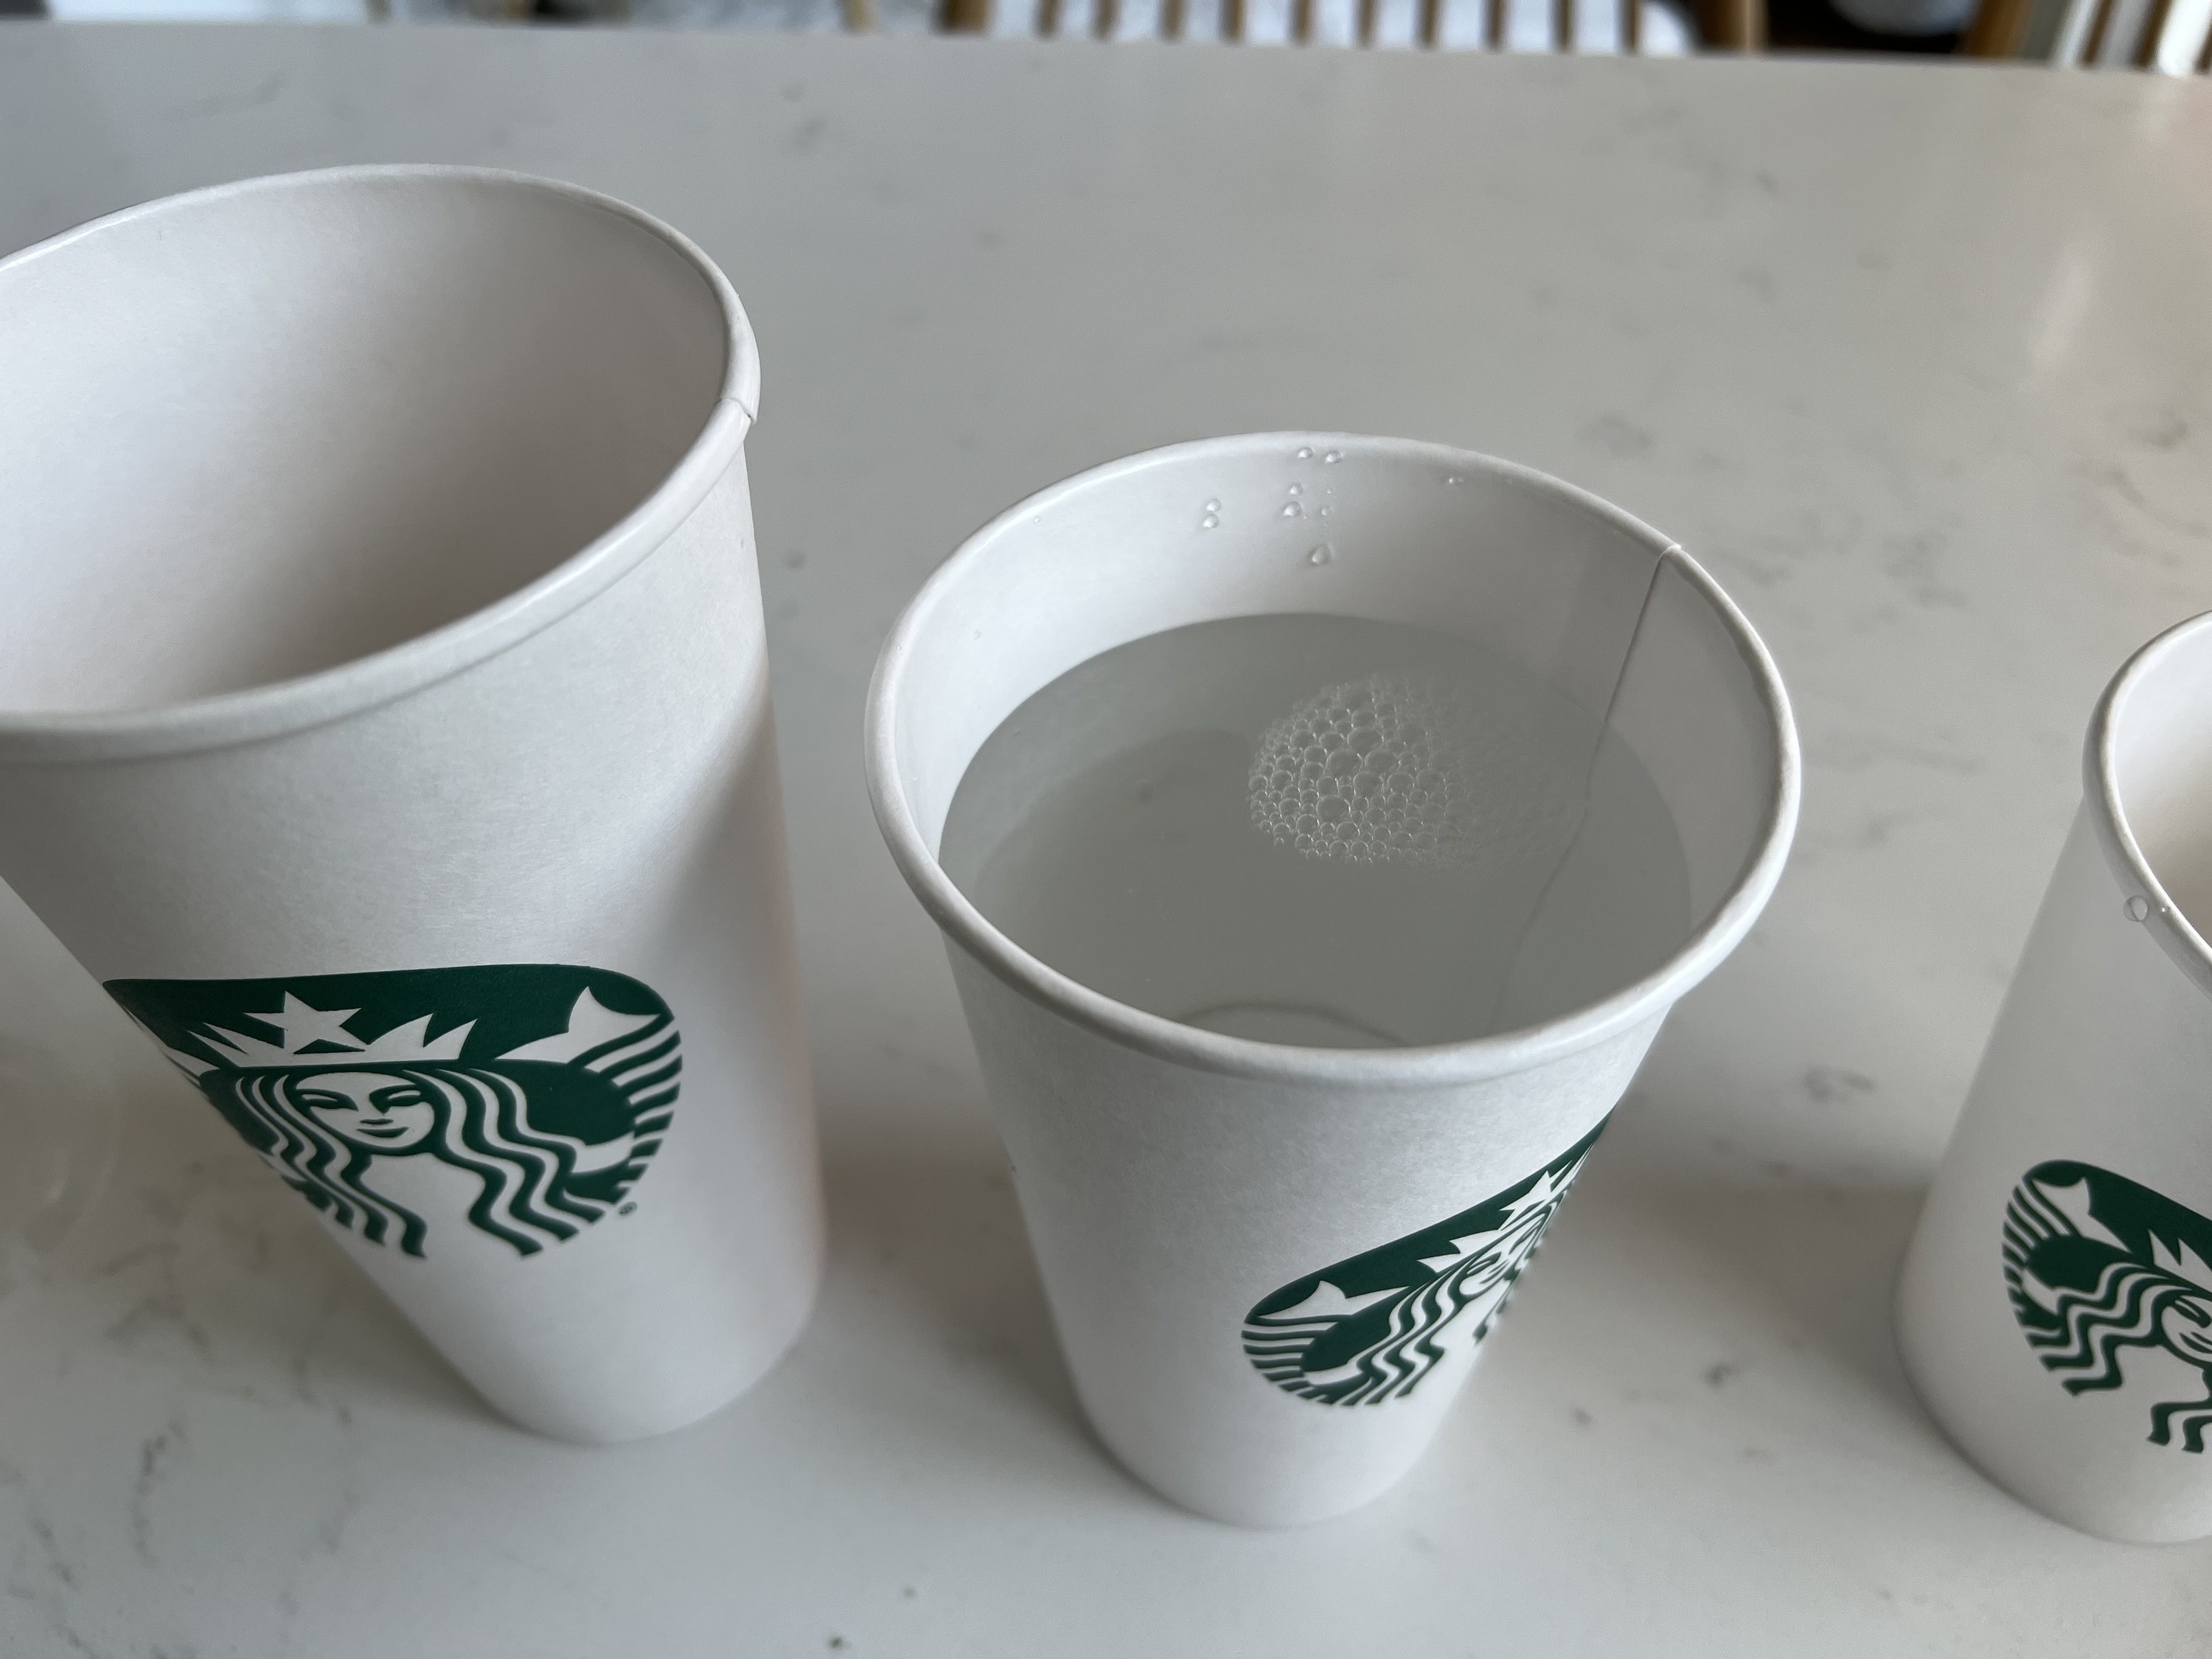 After pouring the water into the grande cup, the water level is about an inch or two below the top of the cup